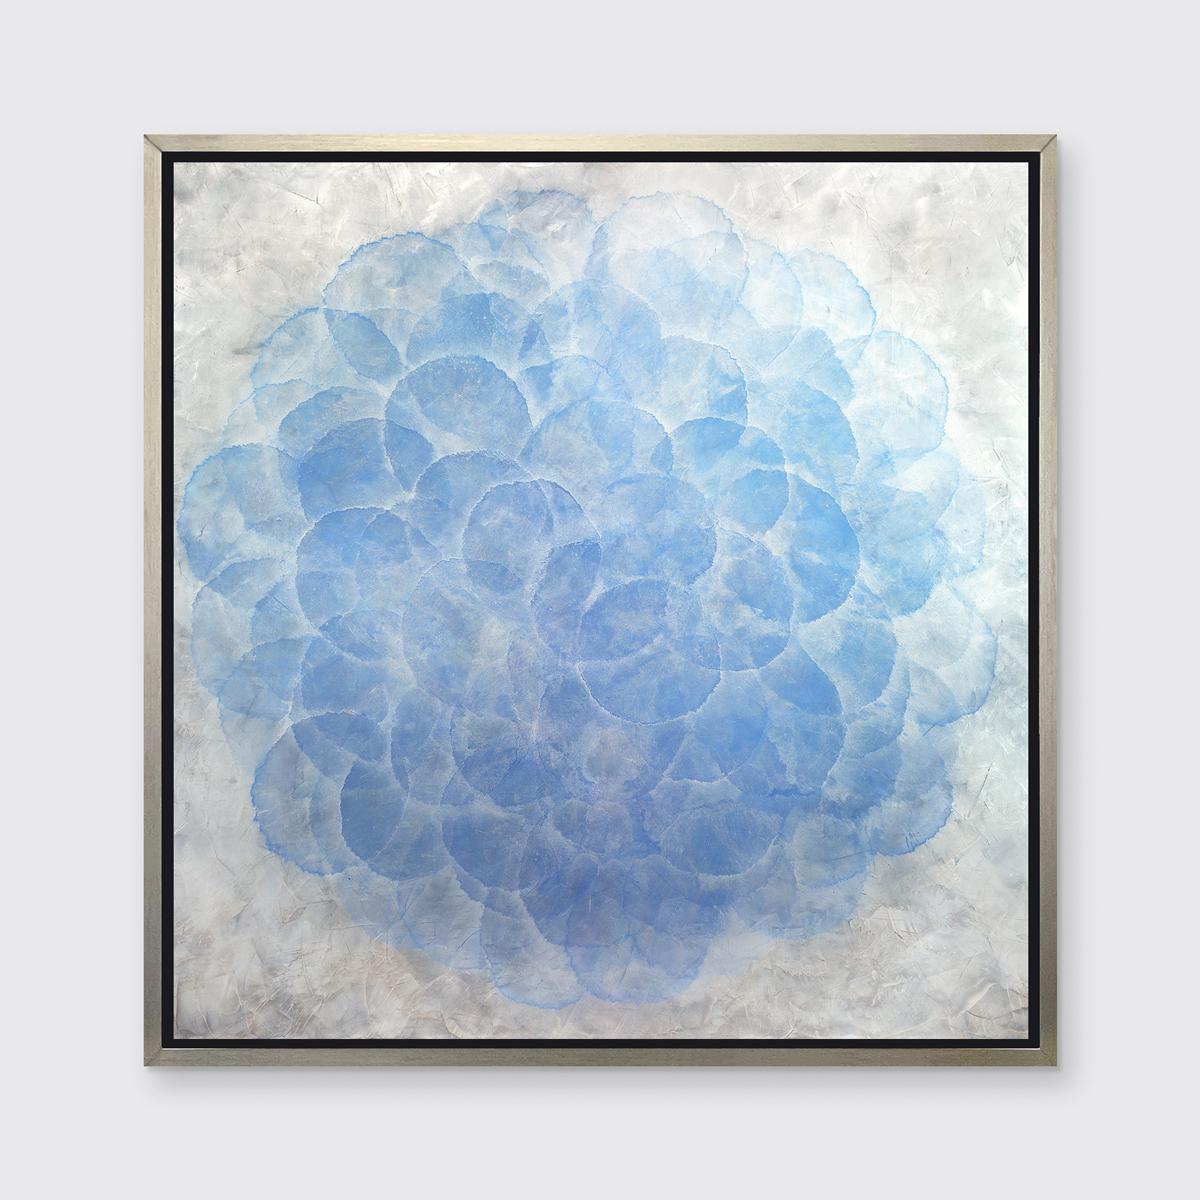 Roger Mudre Abstract Print - "Dichondra, " Framed Limited Edition Giclee Print, 24" x 24"